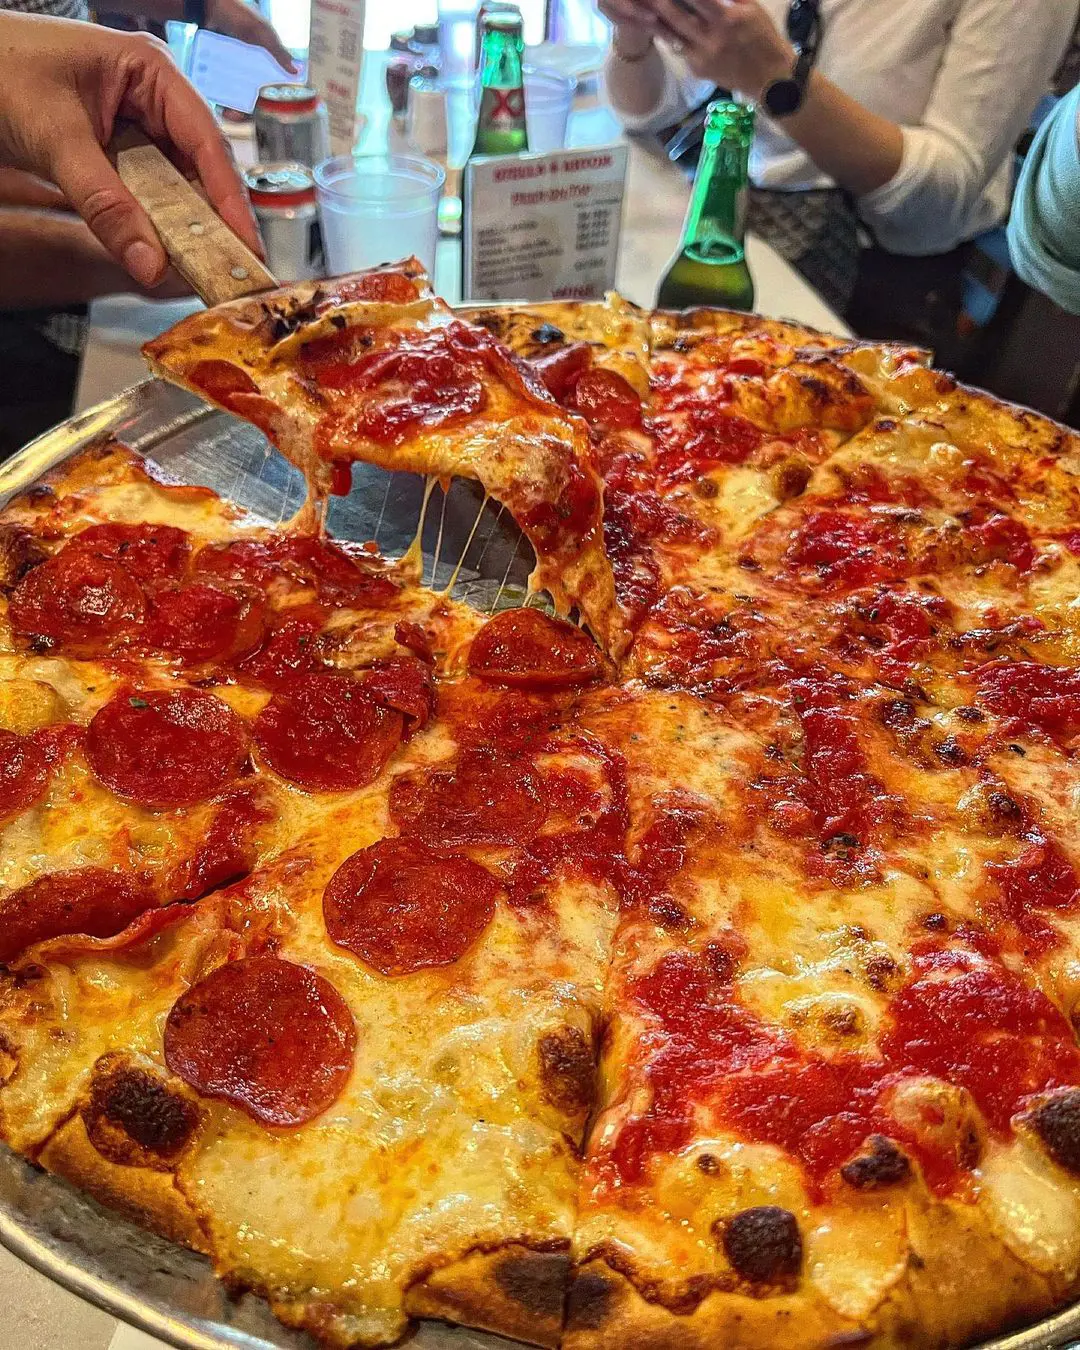 The cheesy sausage dish from John's Pizzeria of Bleecker St looks flavorsome